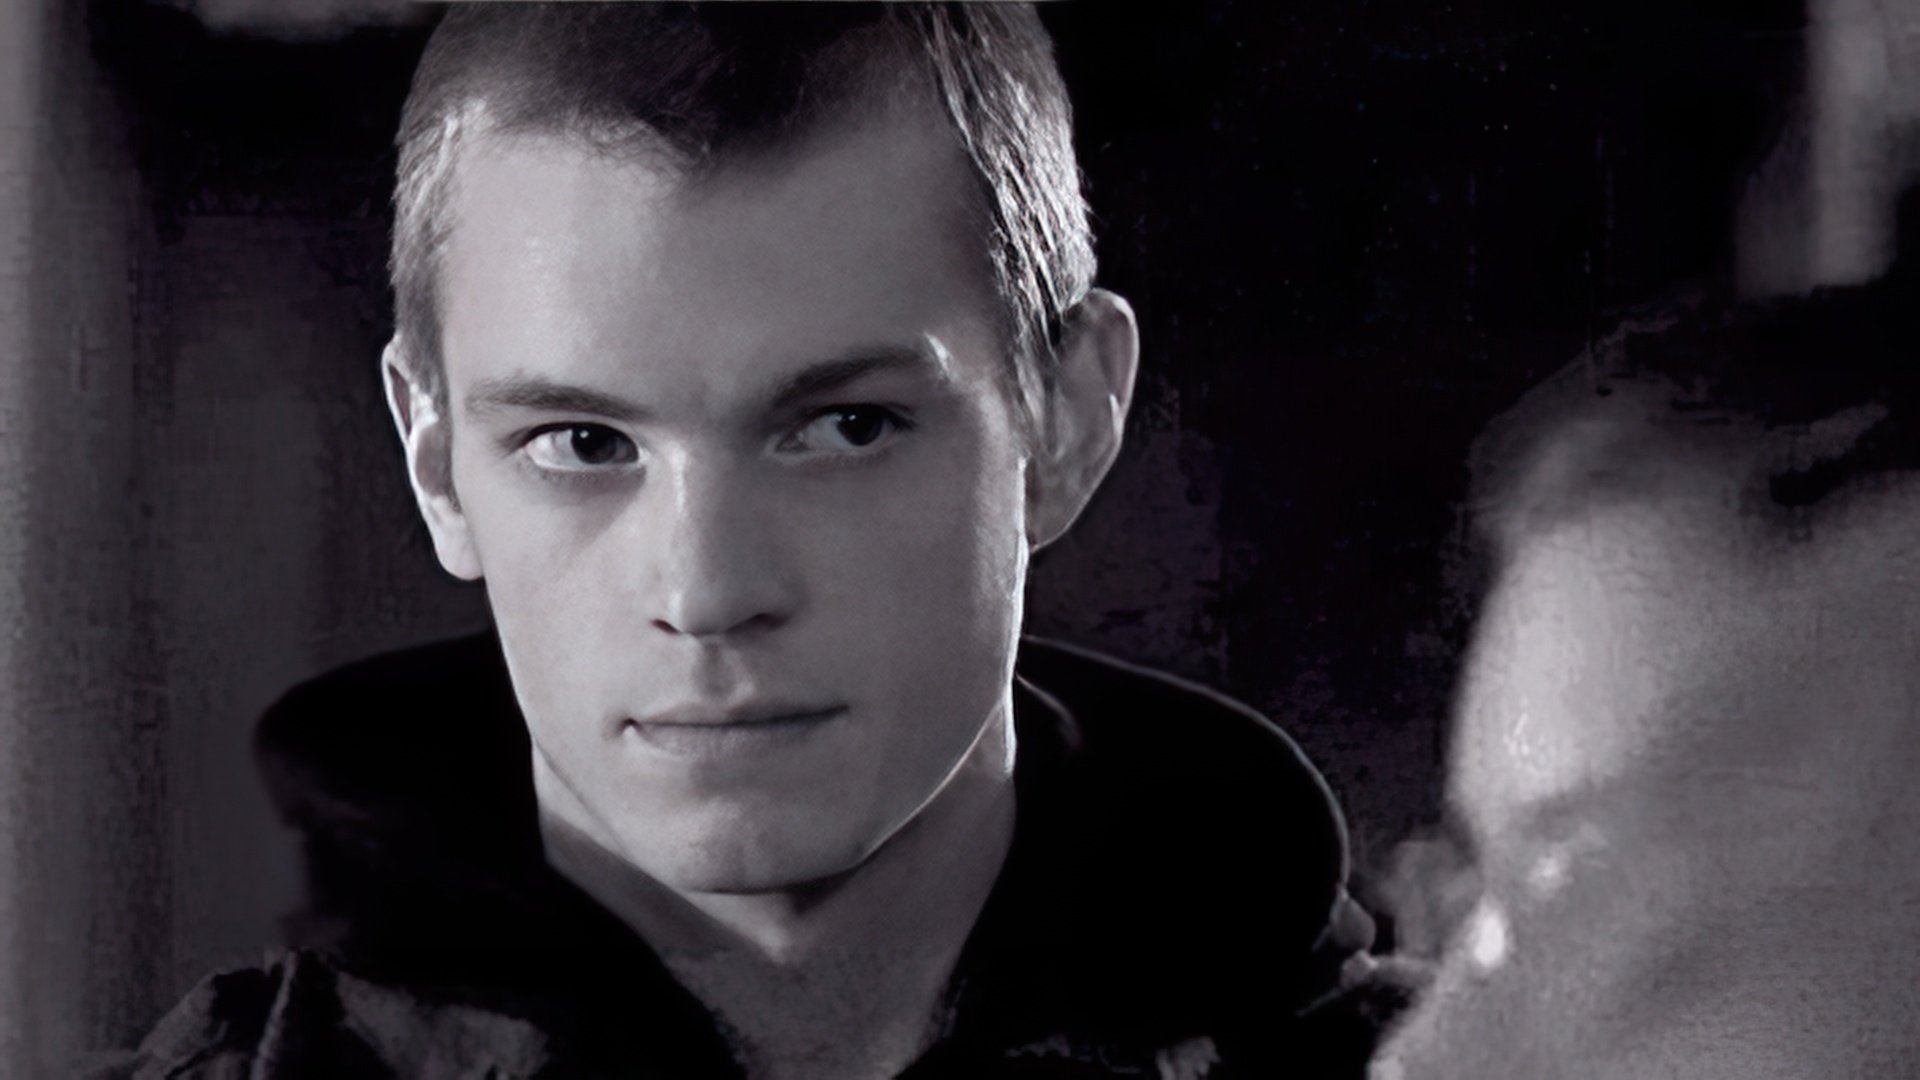 Young Joel Kinnaman in the movie The Invisible, 2002